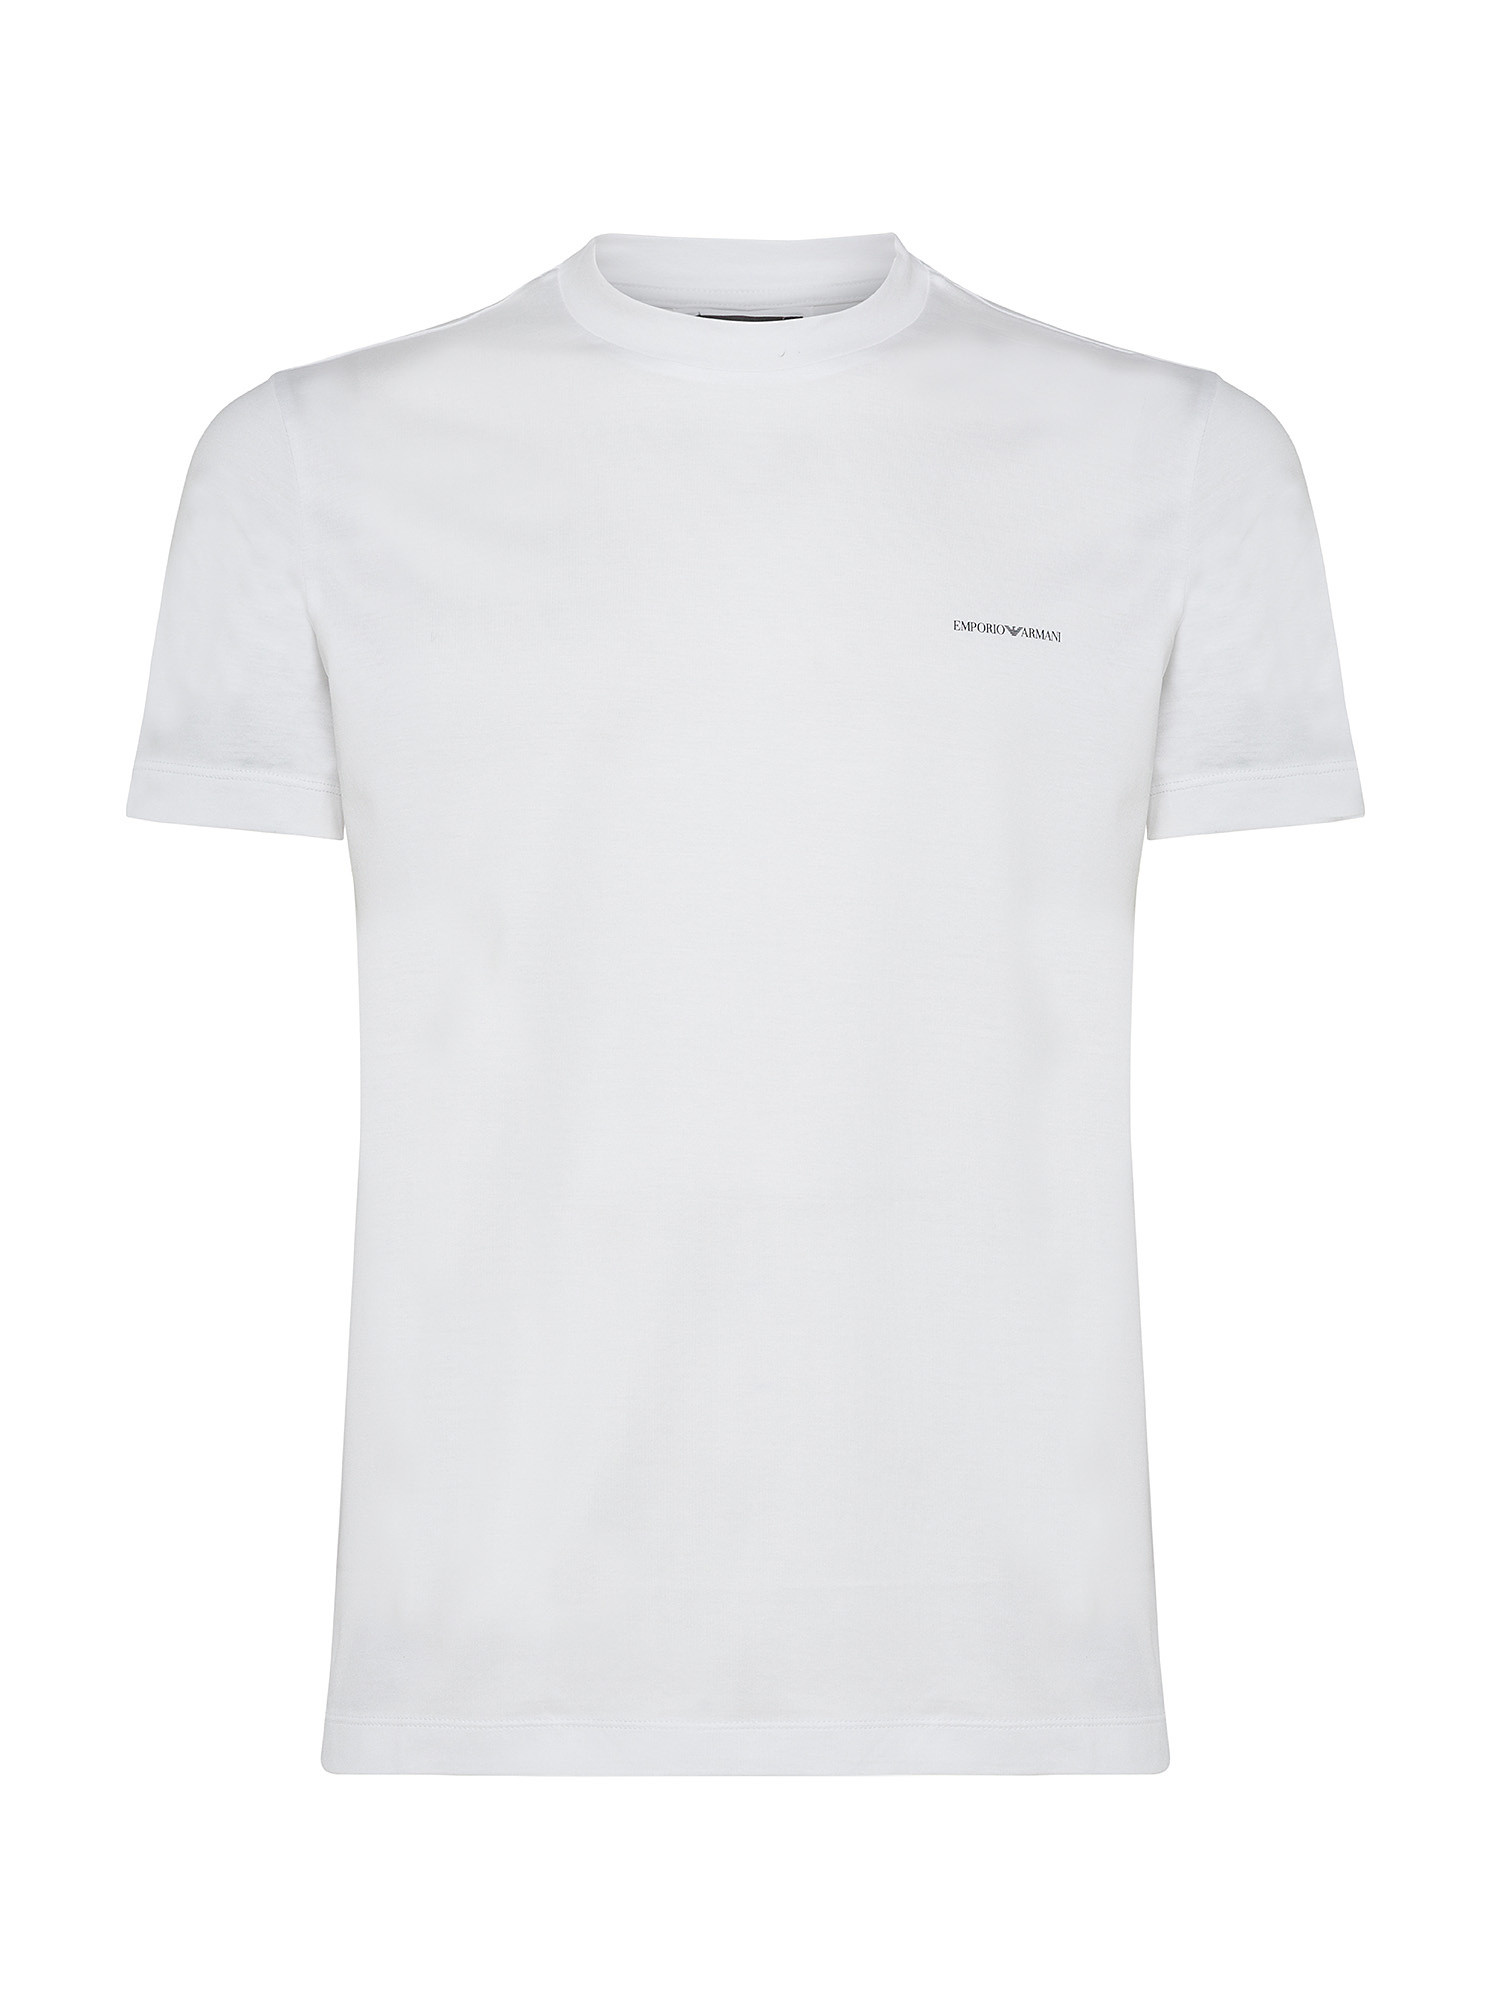 Emporio Armani - T-shirt with lettering logo, White, large image number 0